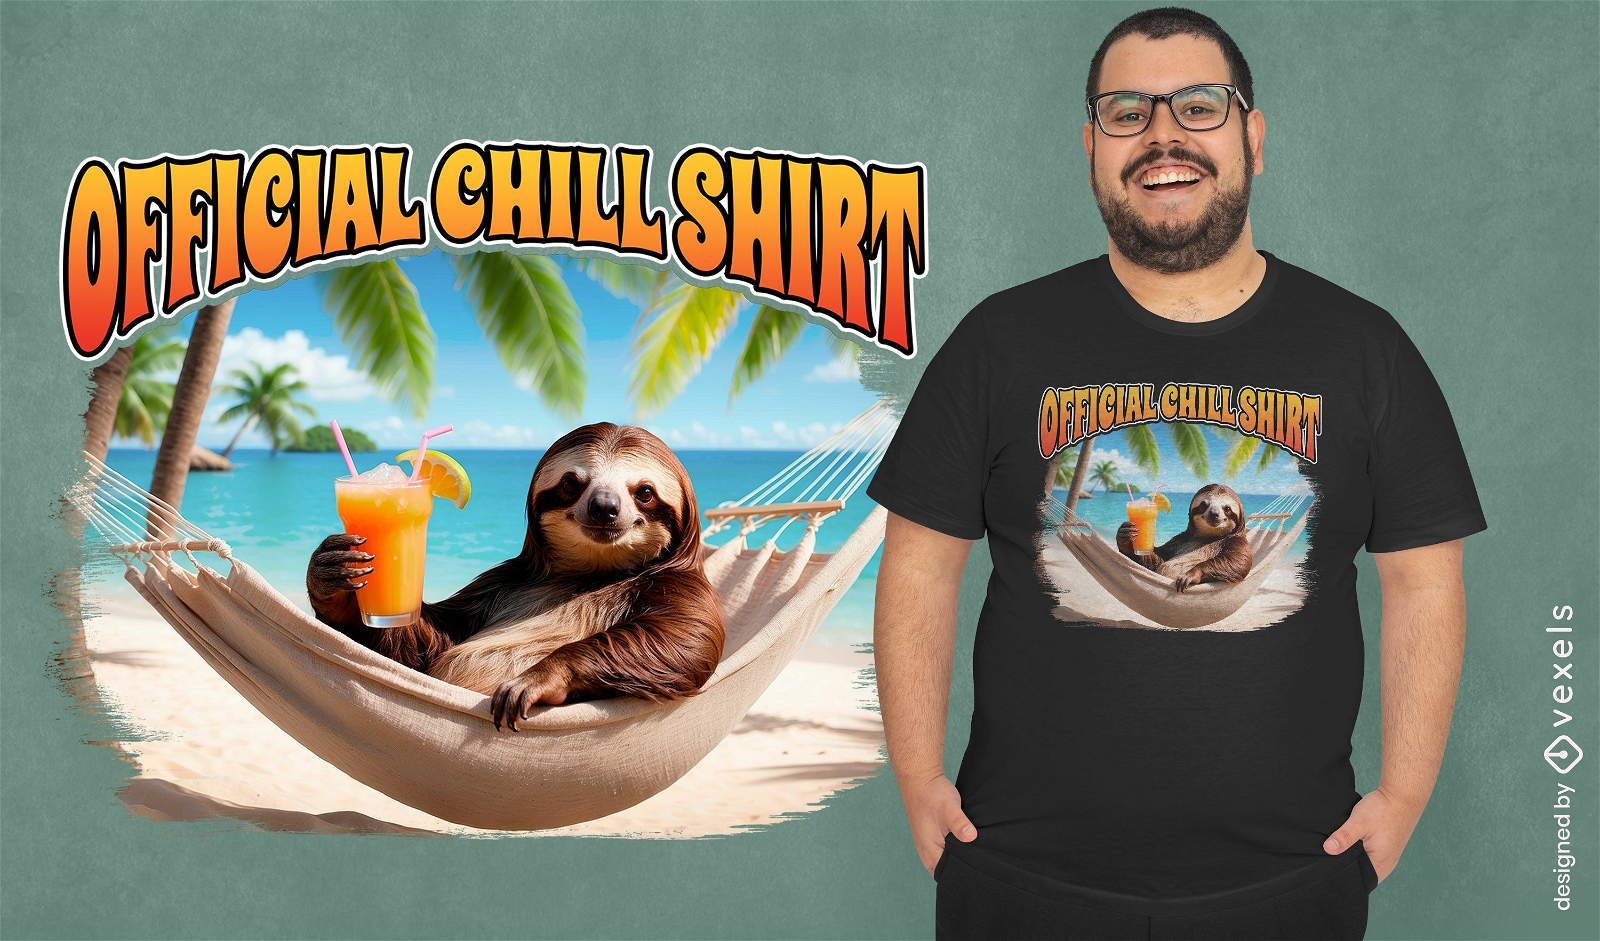 Official chill sloth t-shirt design